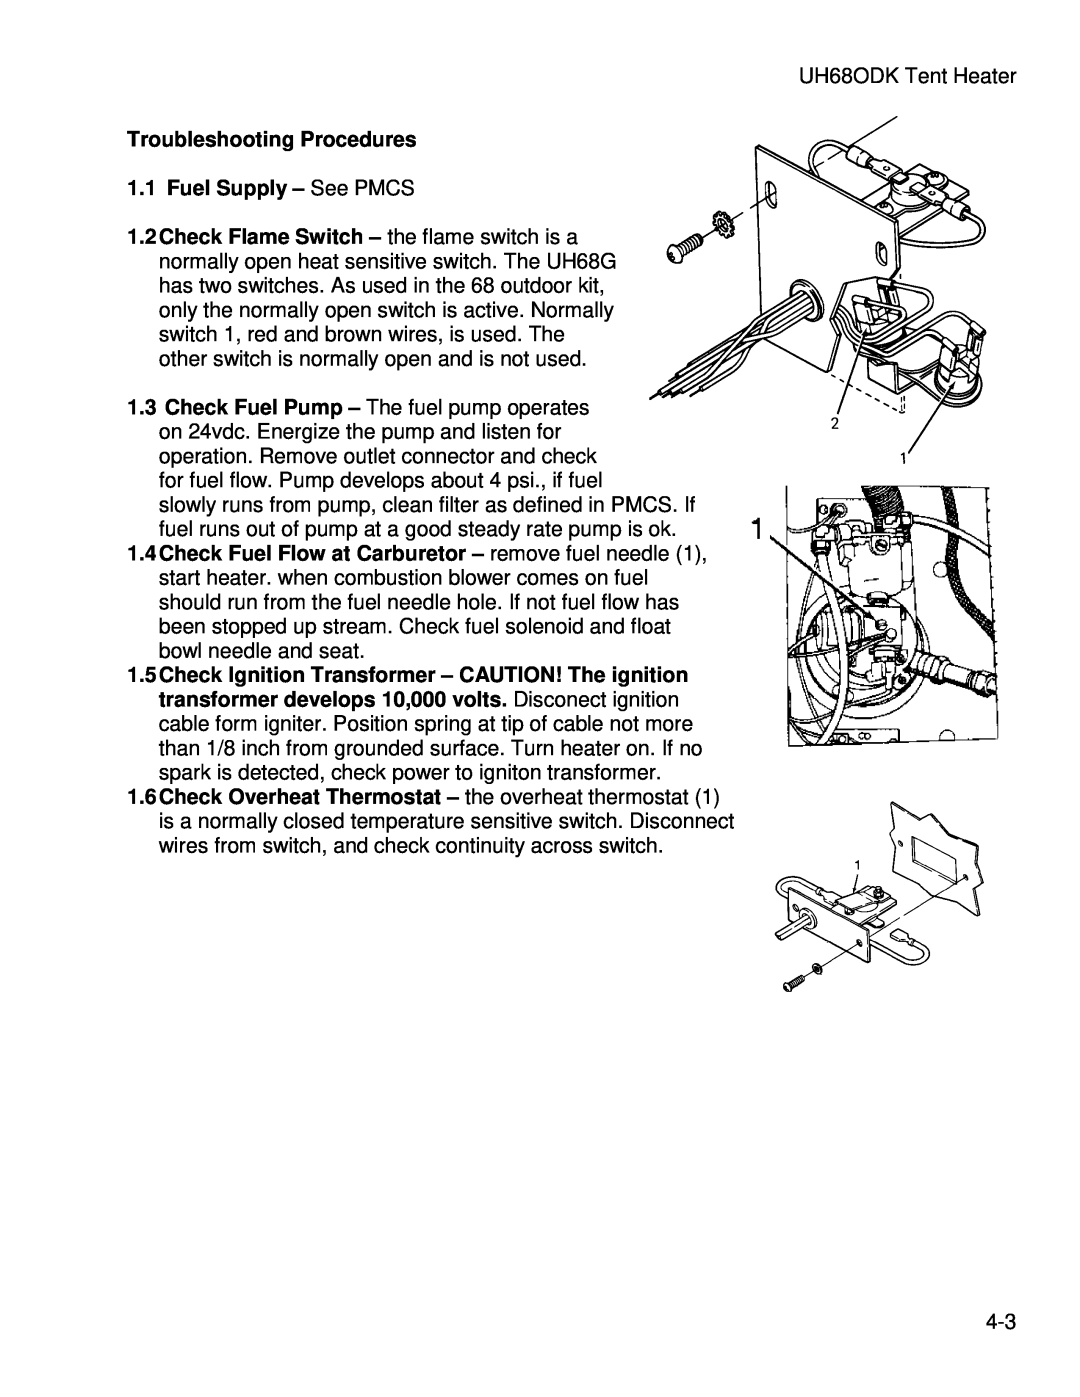 Hunter Fan UH68ODH, UH68ODK manual Troubleshooting Procedures, 1.1Fuel Supply - See PMCS 